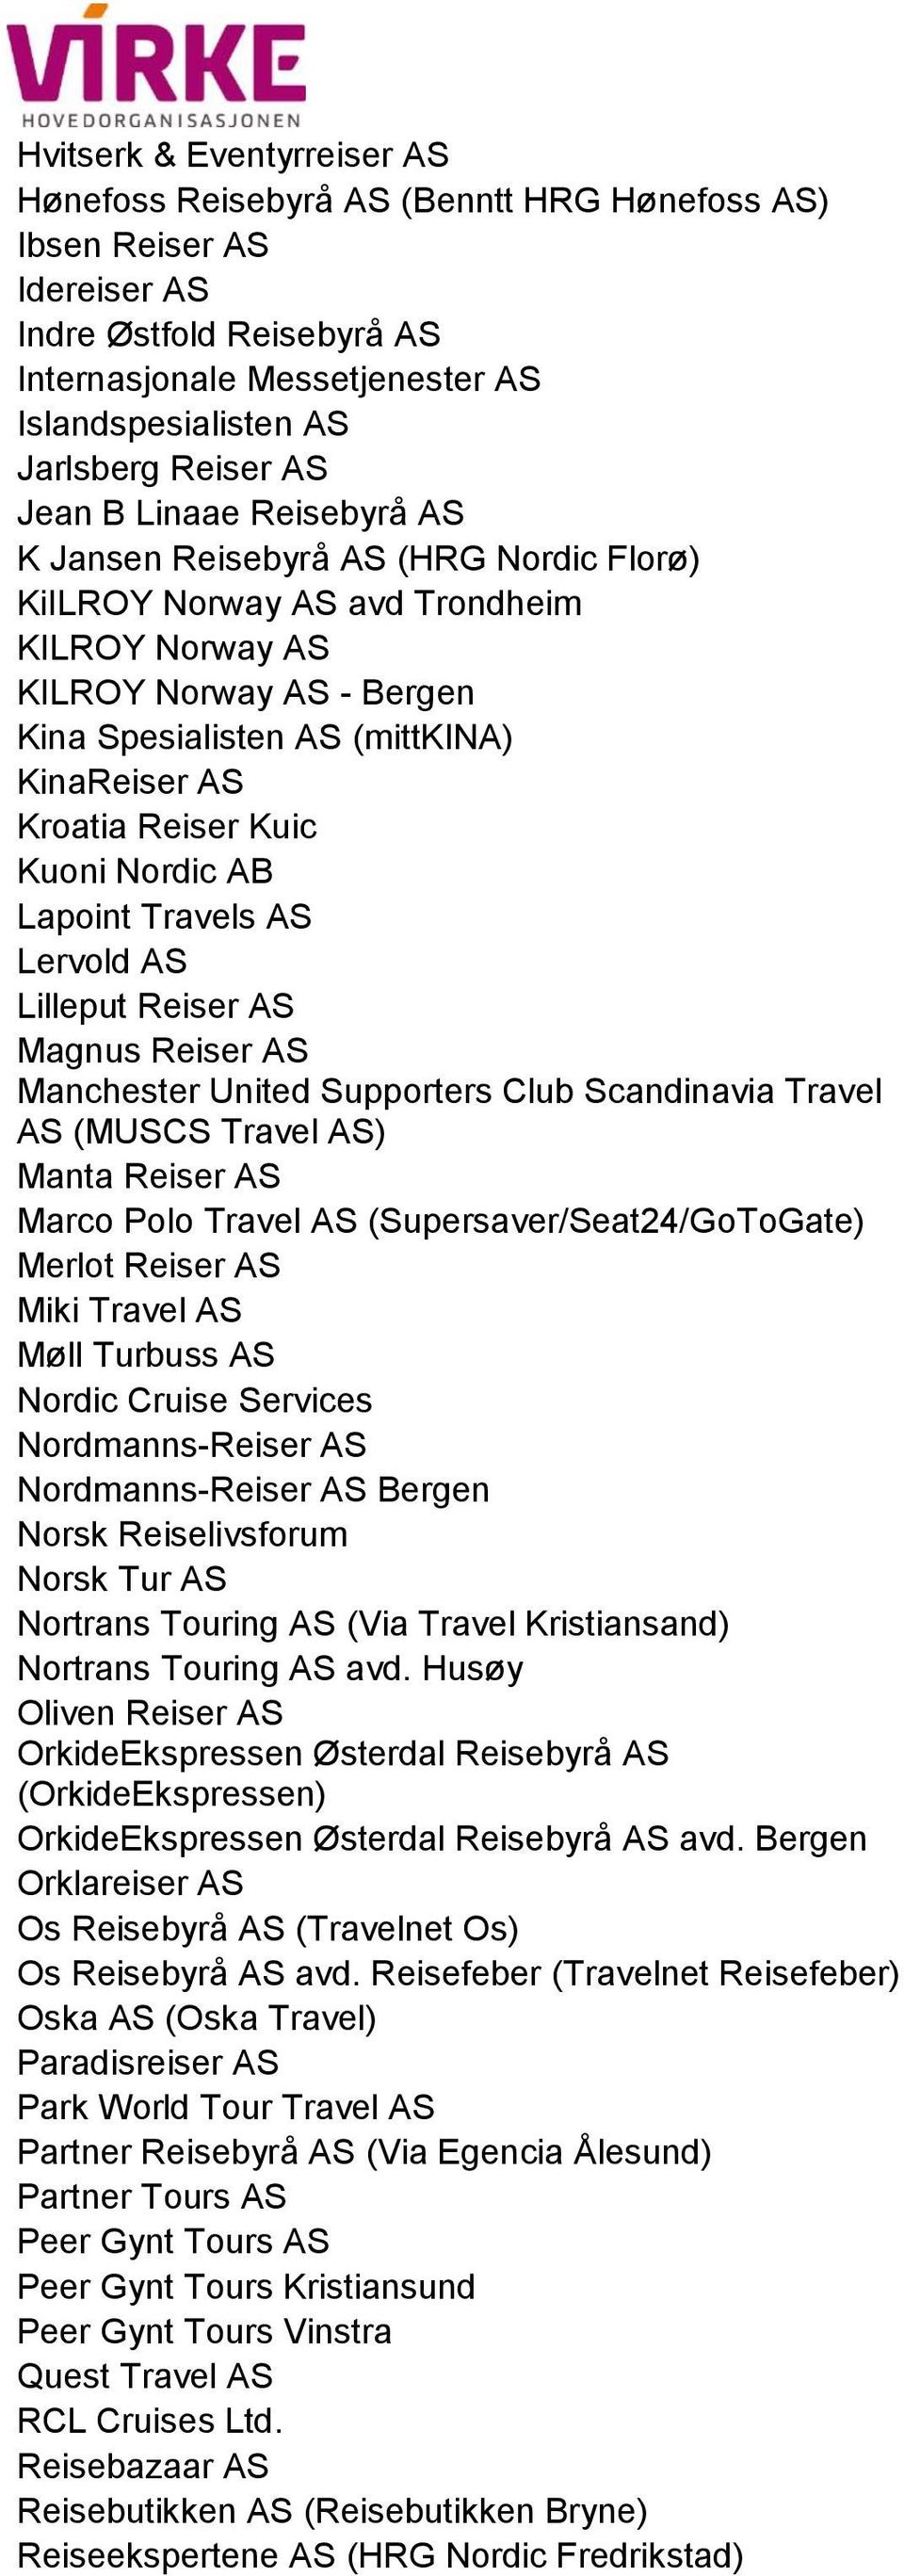 Kroatia Reiser Kuic Kuoni Nordic AB Lapoint Travels AS Lervold AS Lilleput Reiser AS Magnus Reiser AS Manchester United Supporters Club Scandinavia Travel AS (MUSCS Travel AS) Manta Reiser AS Marco